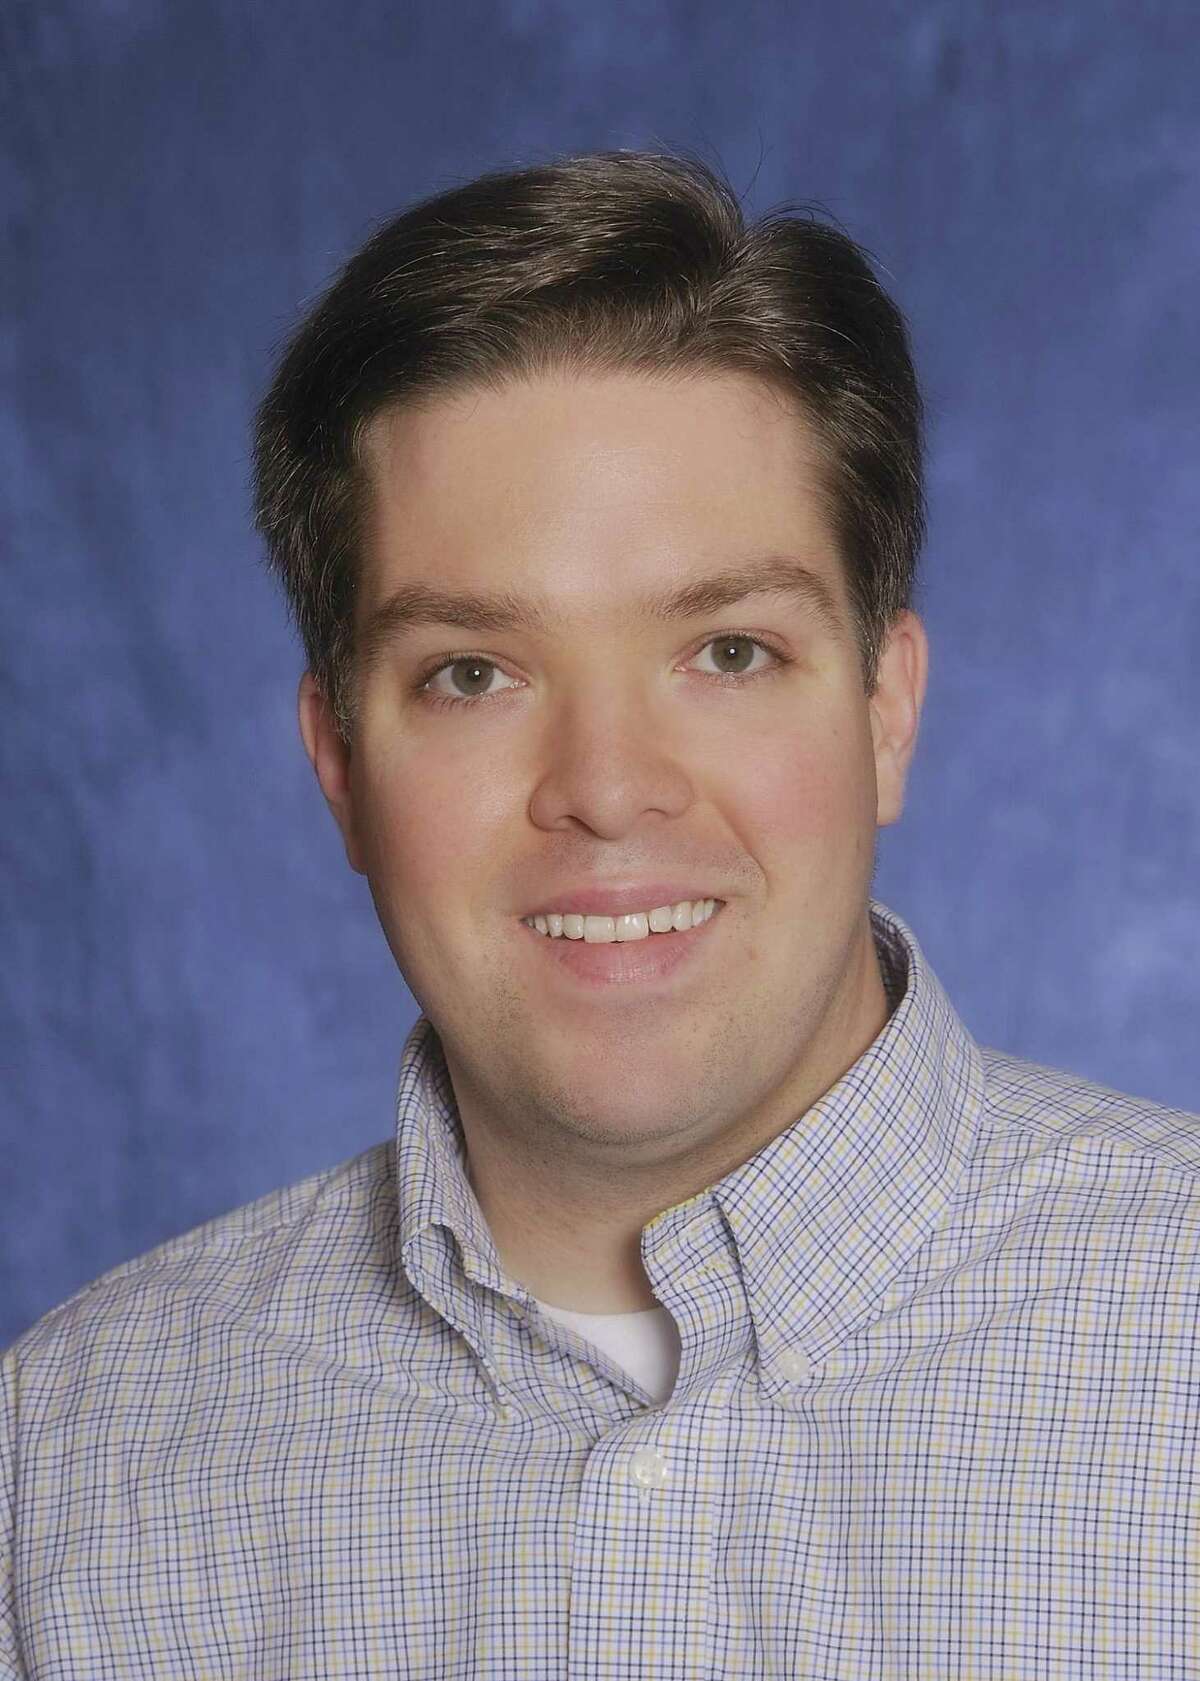 Brian Hermann is an assistant professor in the Department of Biology at the University of Texas at San Antonio